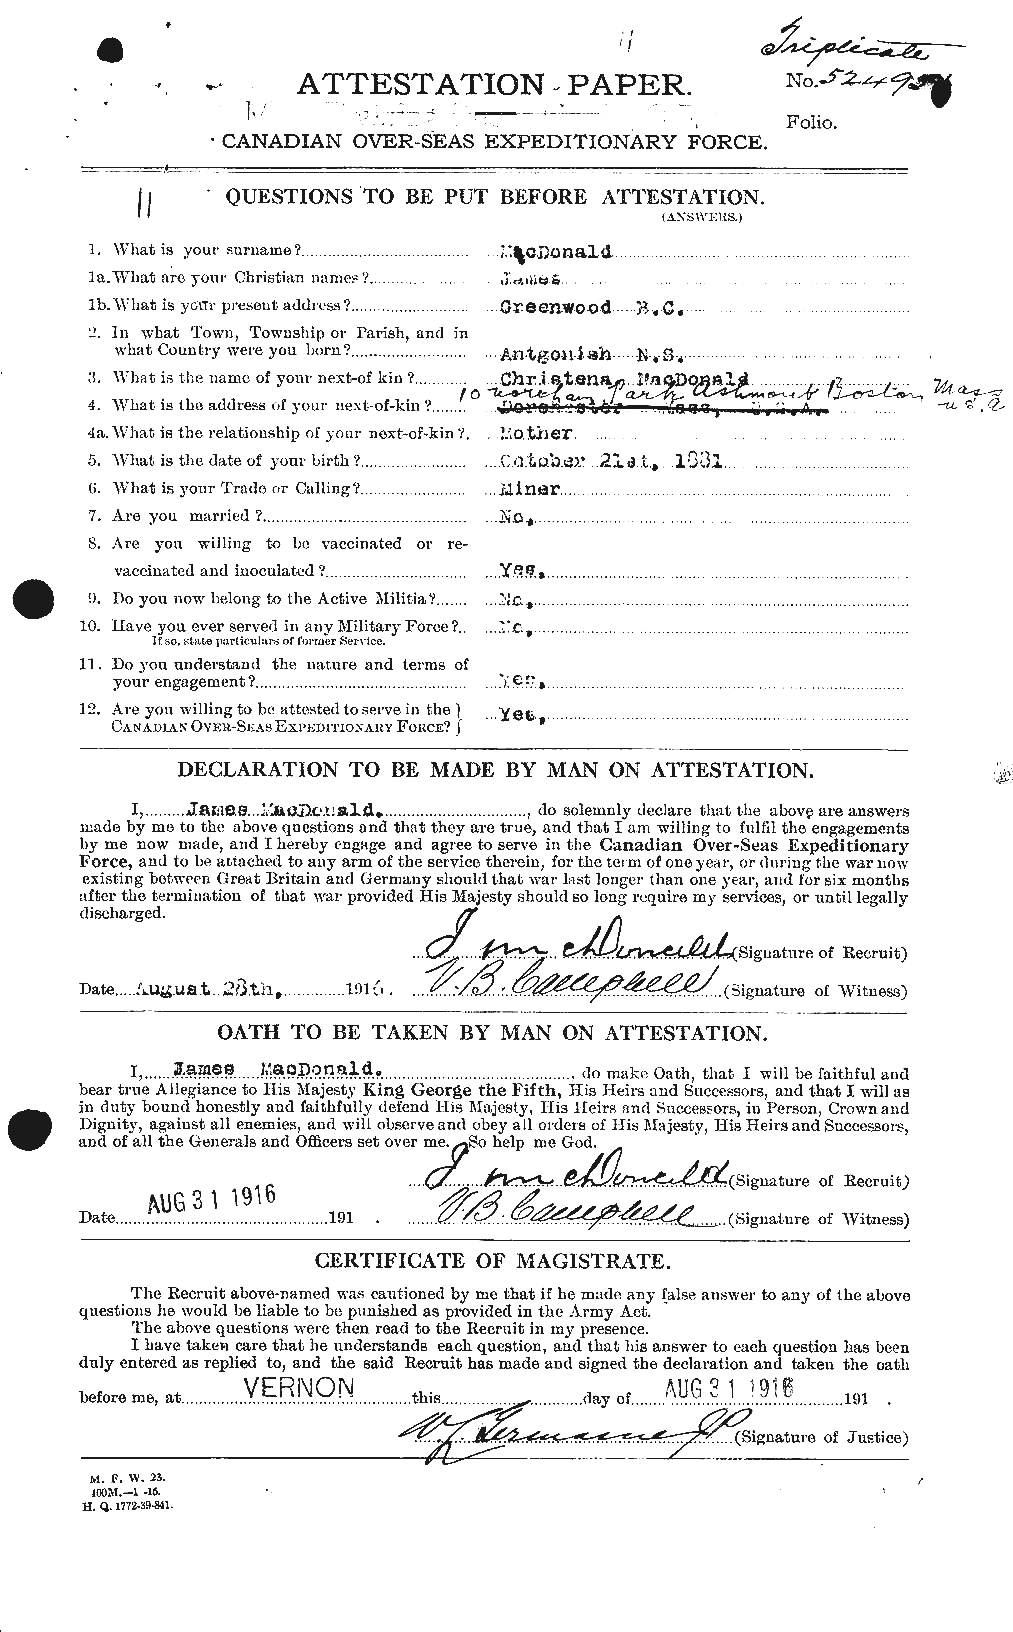 Personnel Records of the First World War - CEF 519211a